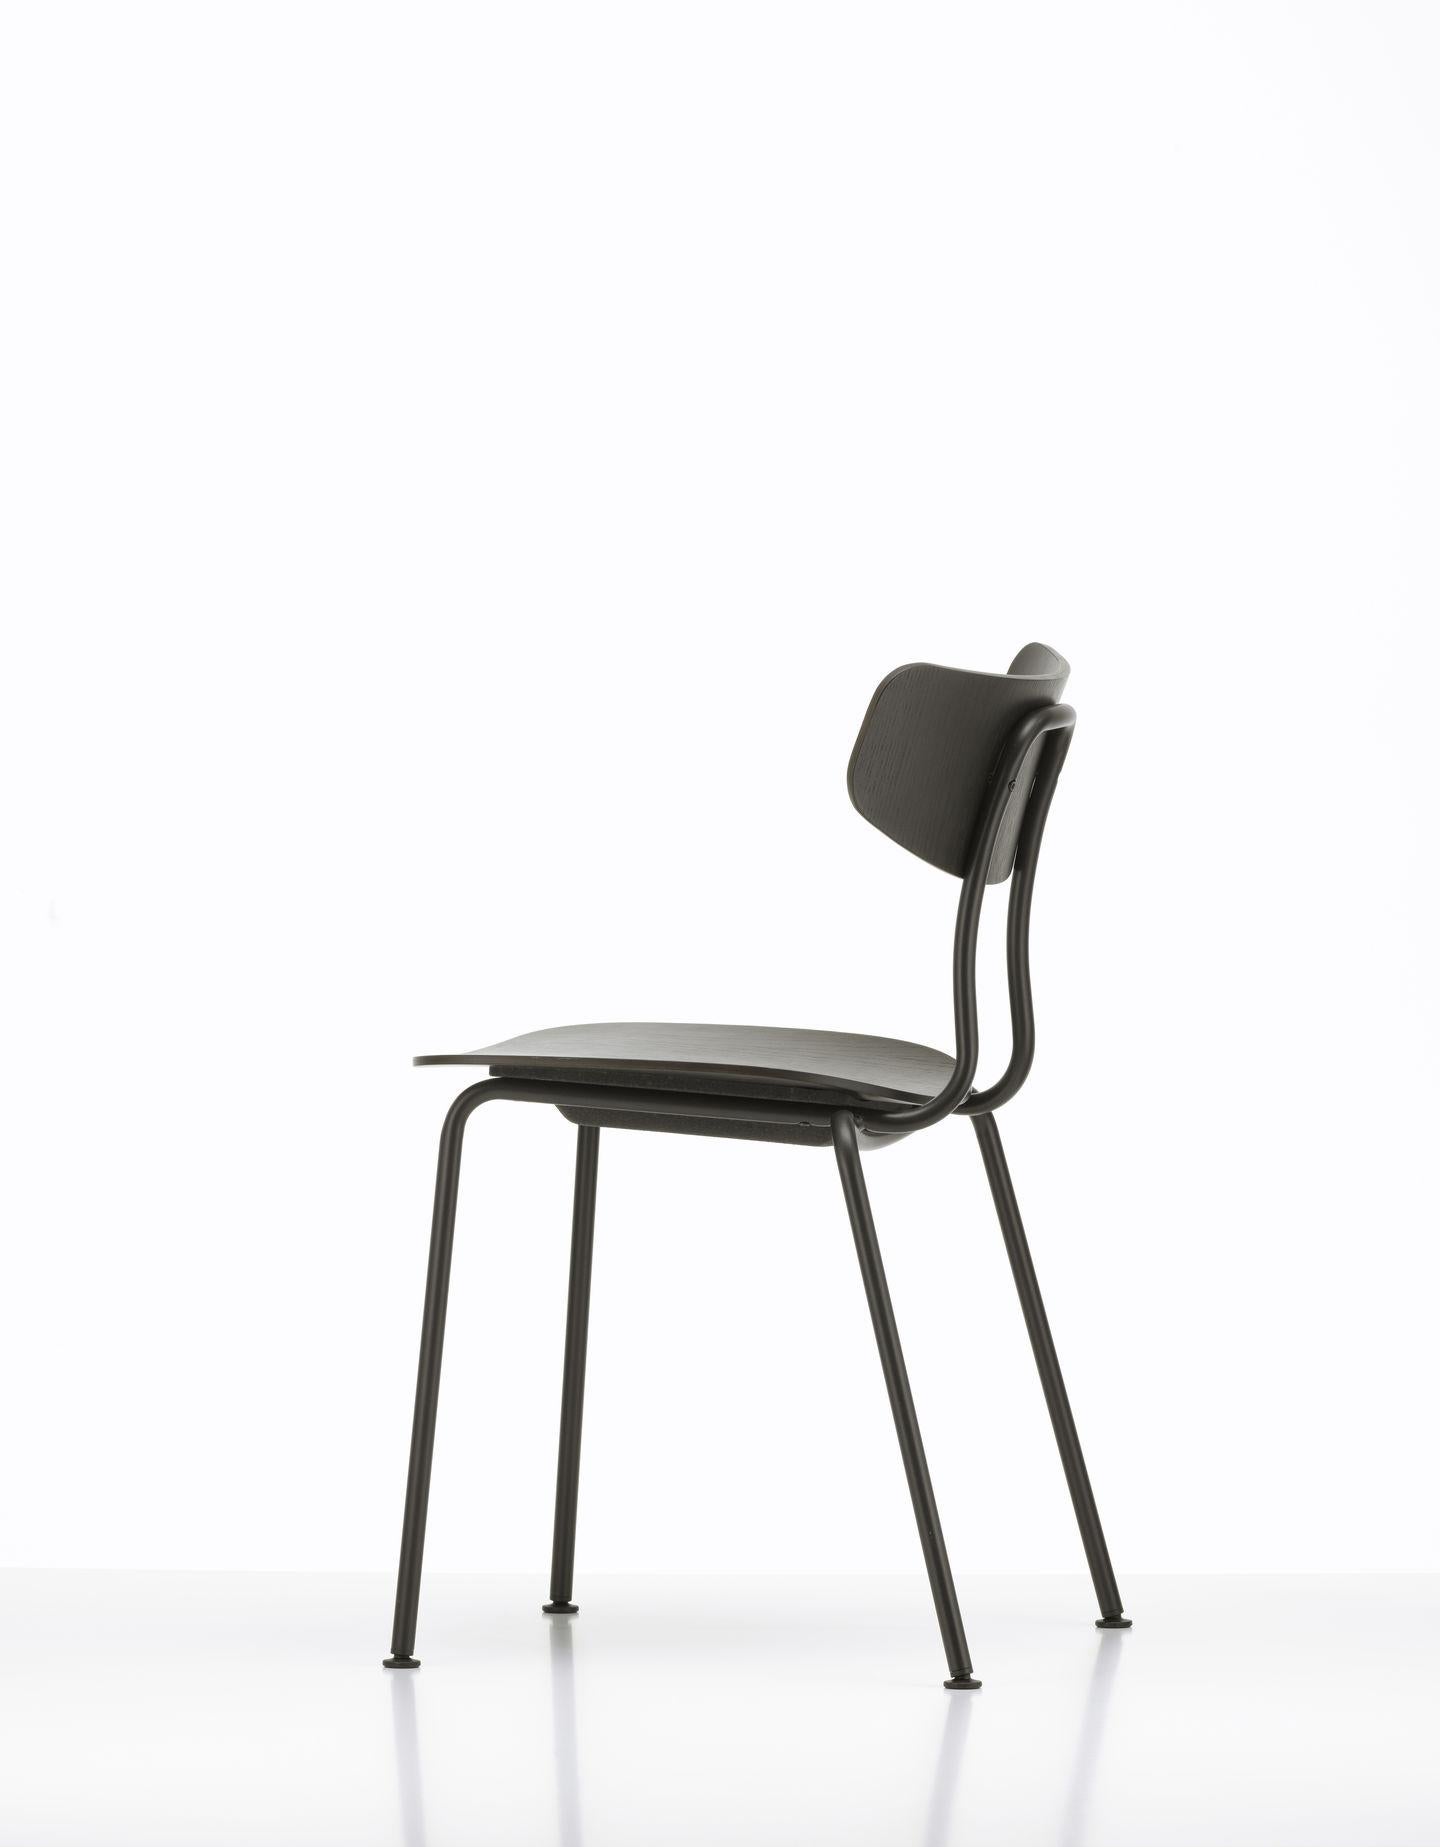 Swiss Set of Four Moca Chairs in Plywood and Metal Designed by Jasper Morrison